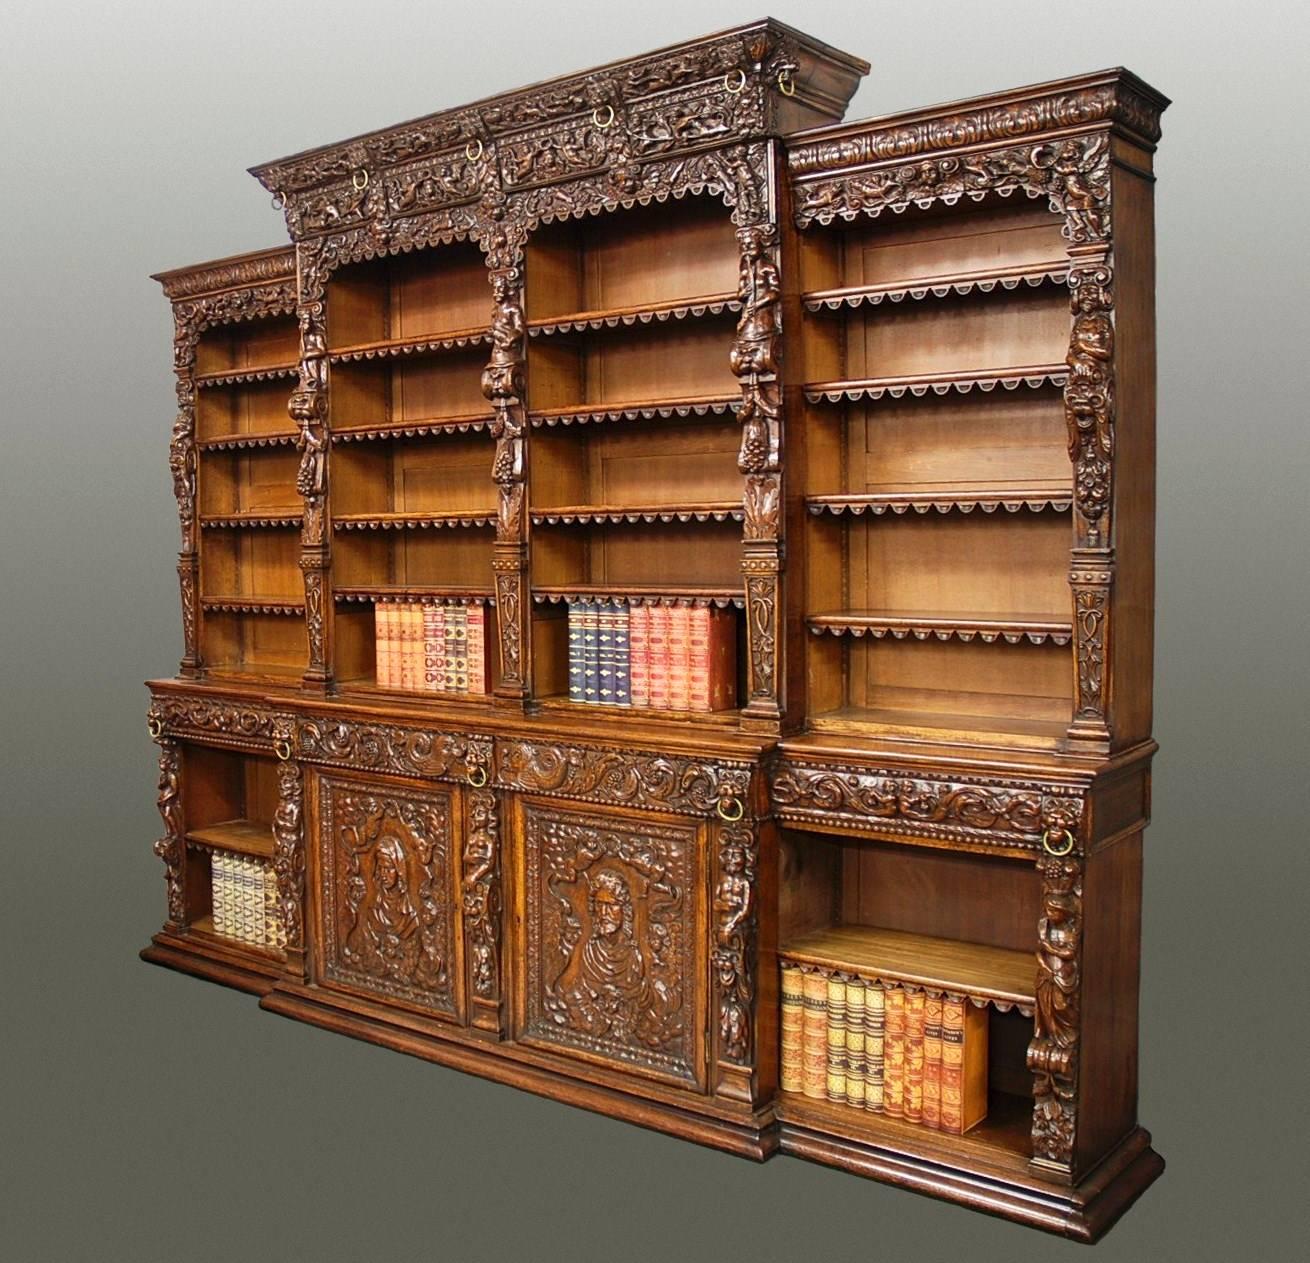 An exceptional quality mid-19th century oak breakfront antiquarian open bookcase in the Renaissance style of superb patina (color).

This superb bookcase consists of a slightly taller central section, of breakfront form, with a finely carved